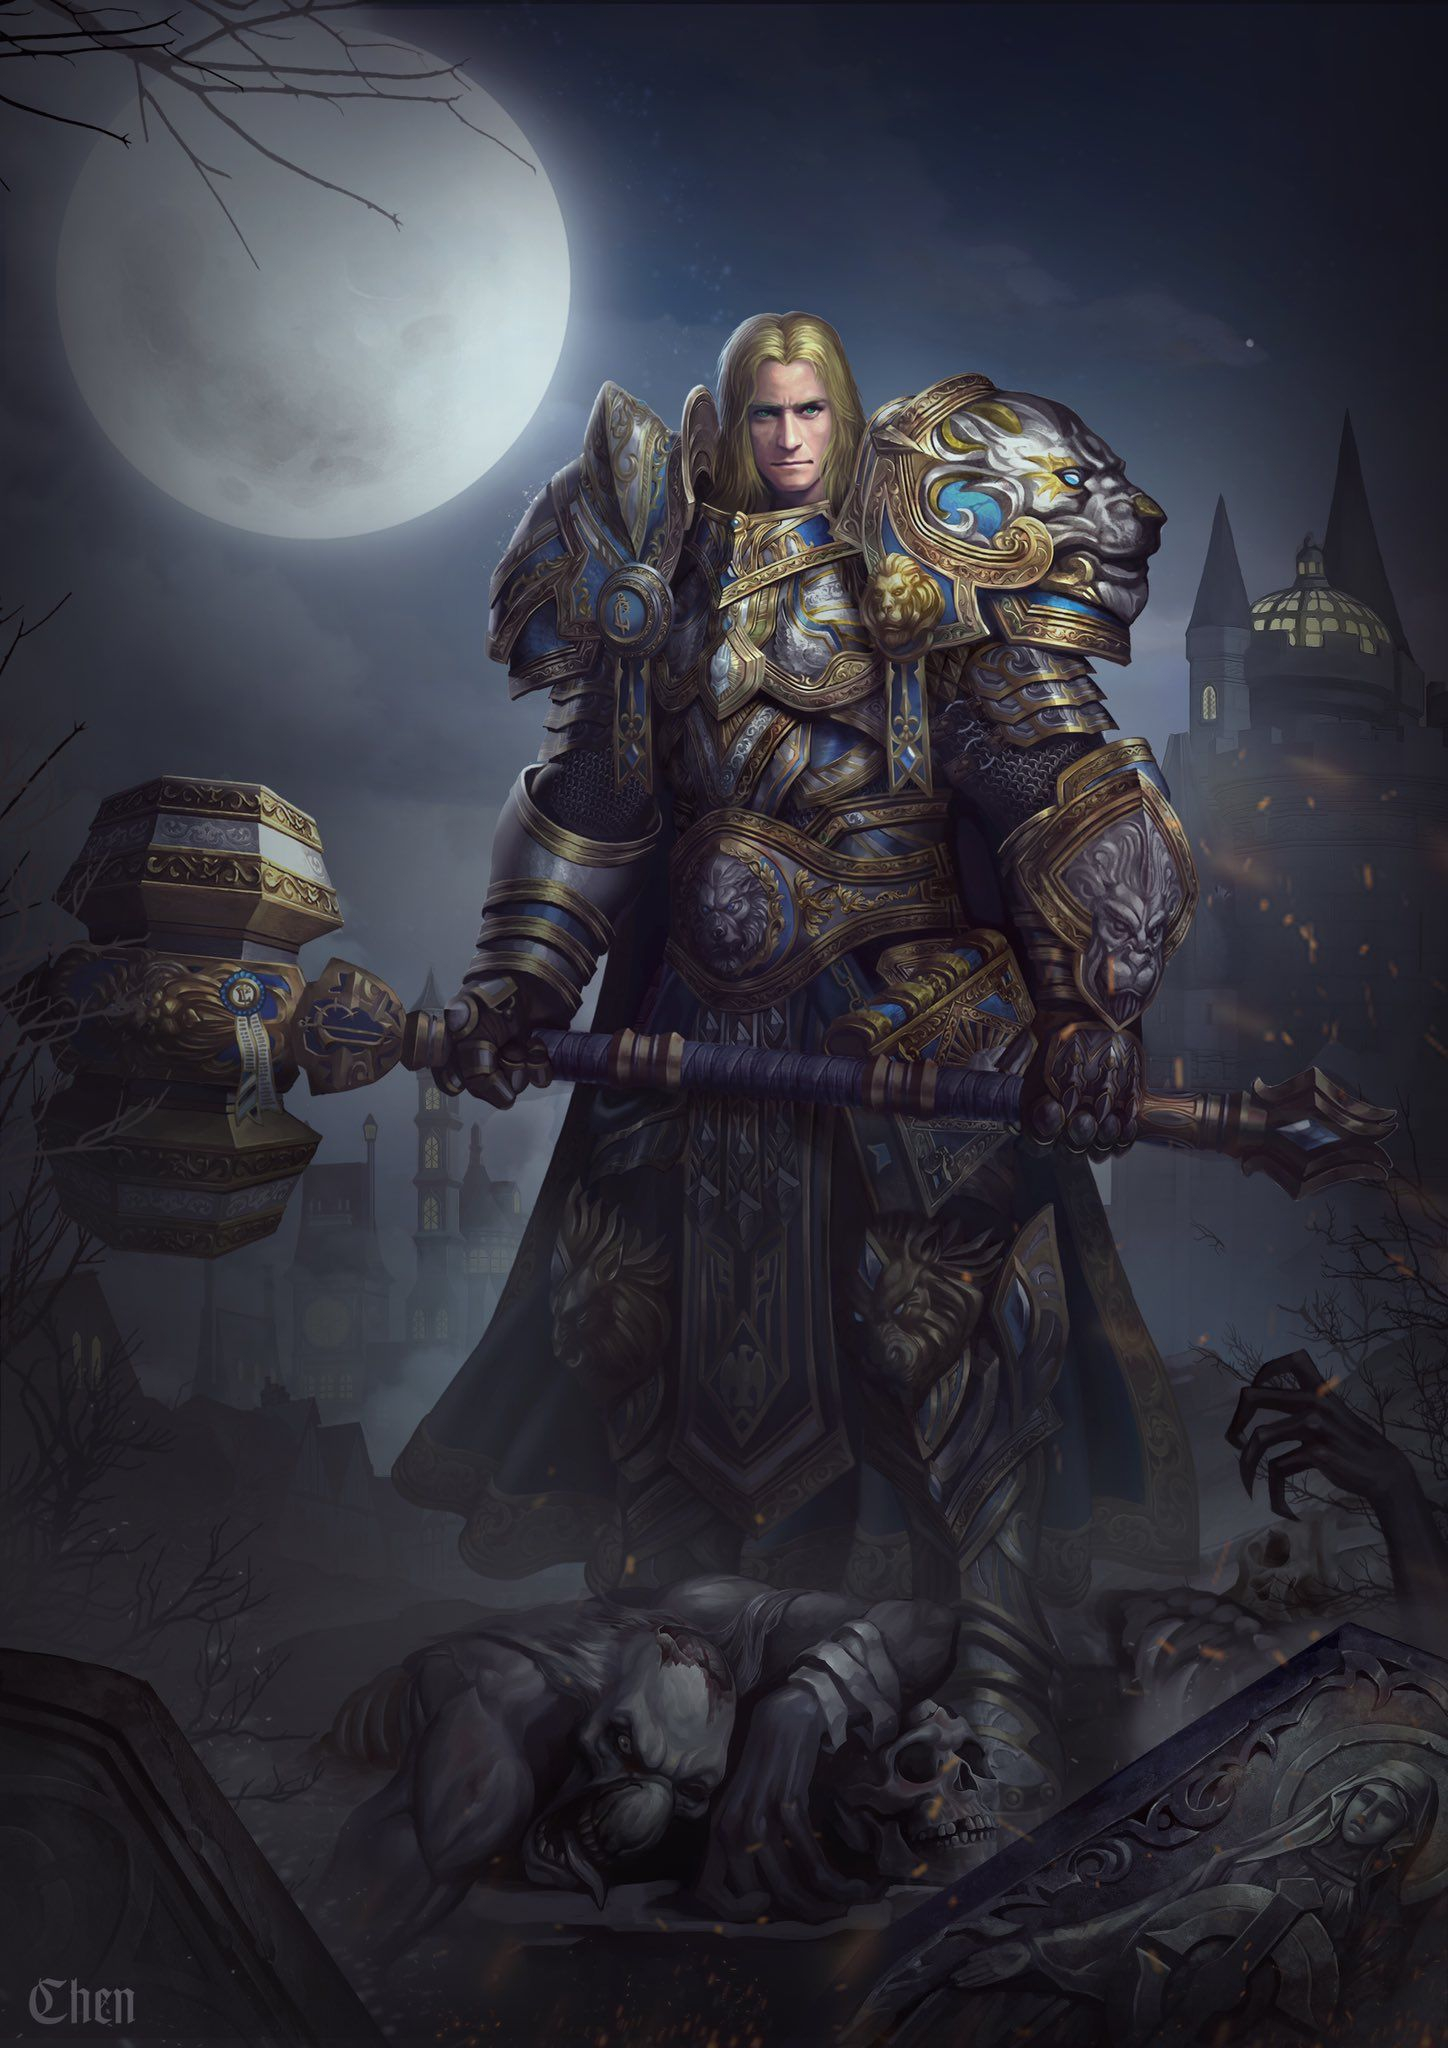 1448x2048 ;&#159;&sect;&nbsp;&eth;&#159;&#146;&#142;&eth;&#159;&#145;&#138;Studio on Twitter | World of warcraft wallpaper, World of warcraft paladin, World of warcraft characters